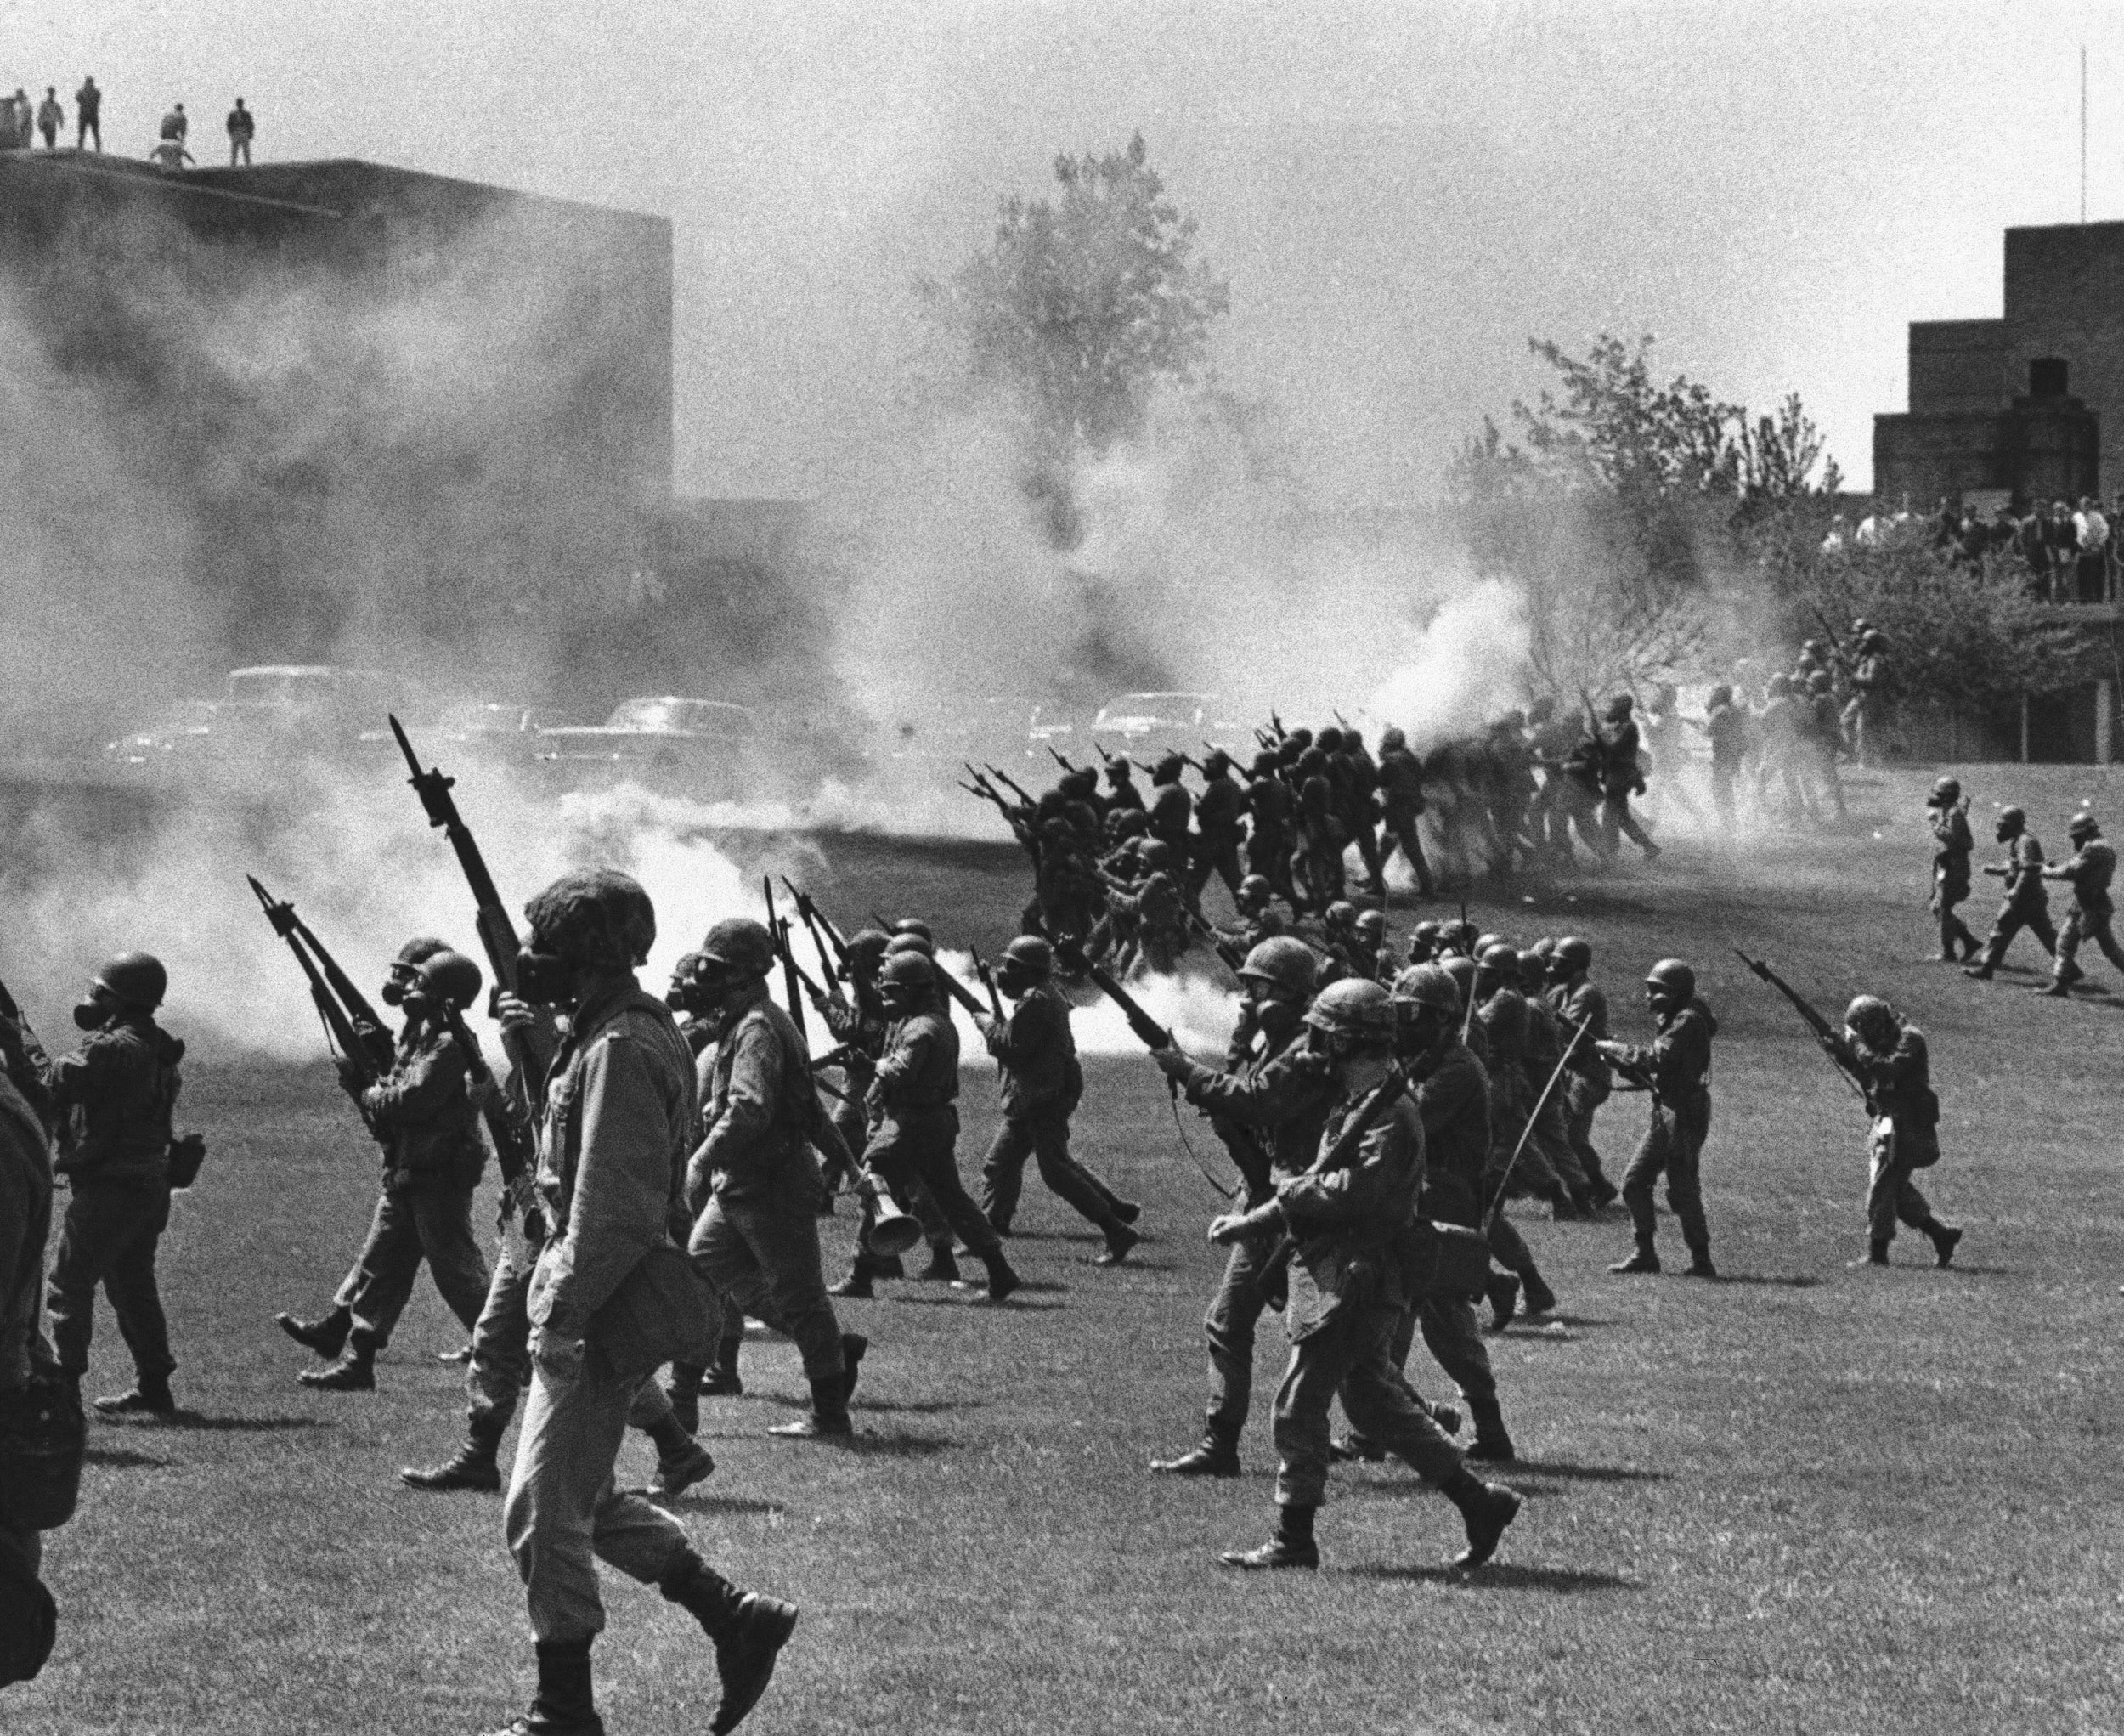 The Ohio National guard move in on anti-war protesters at Kent State University in 1970.